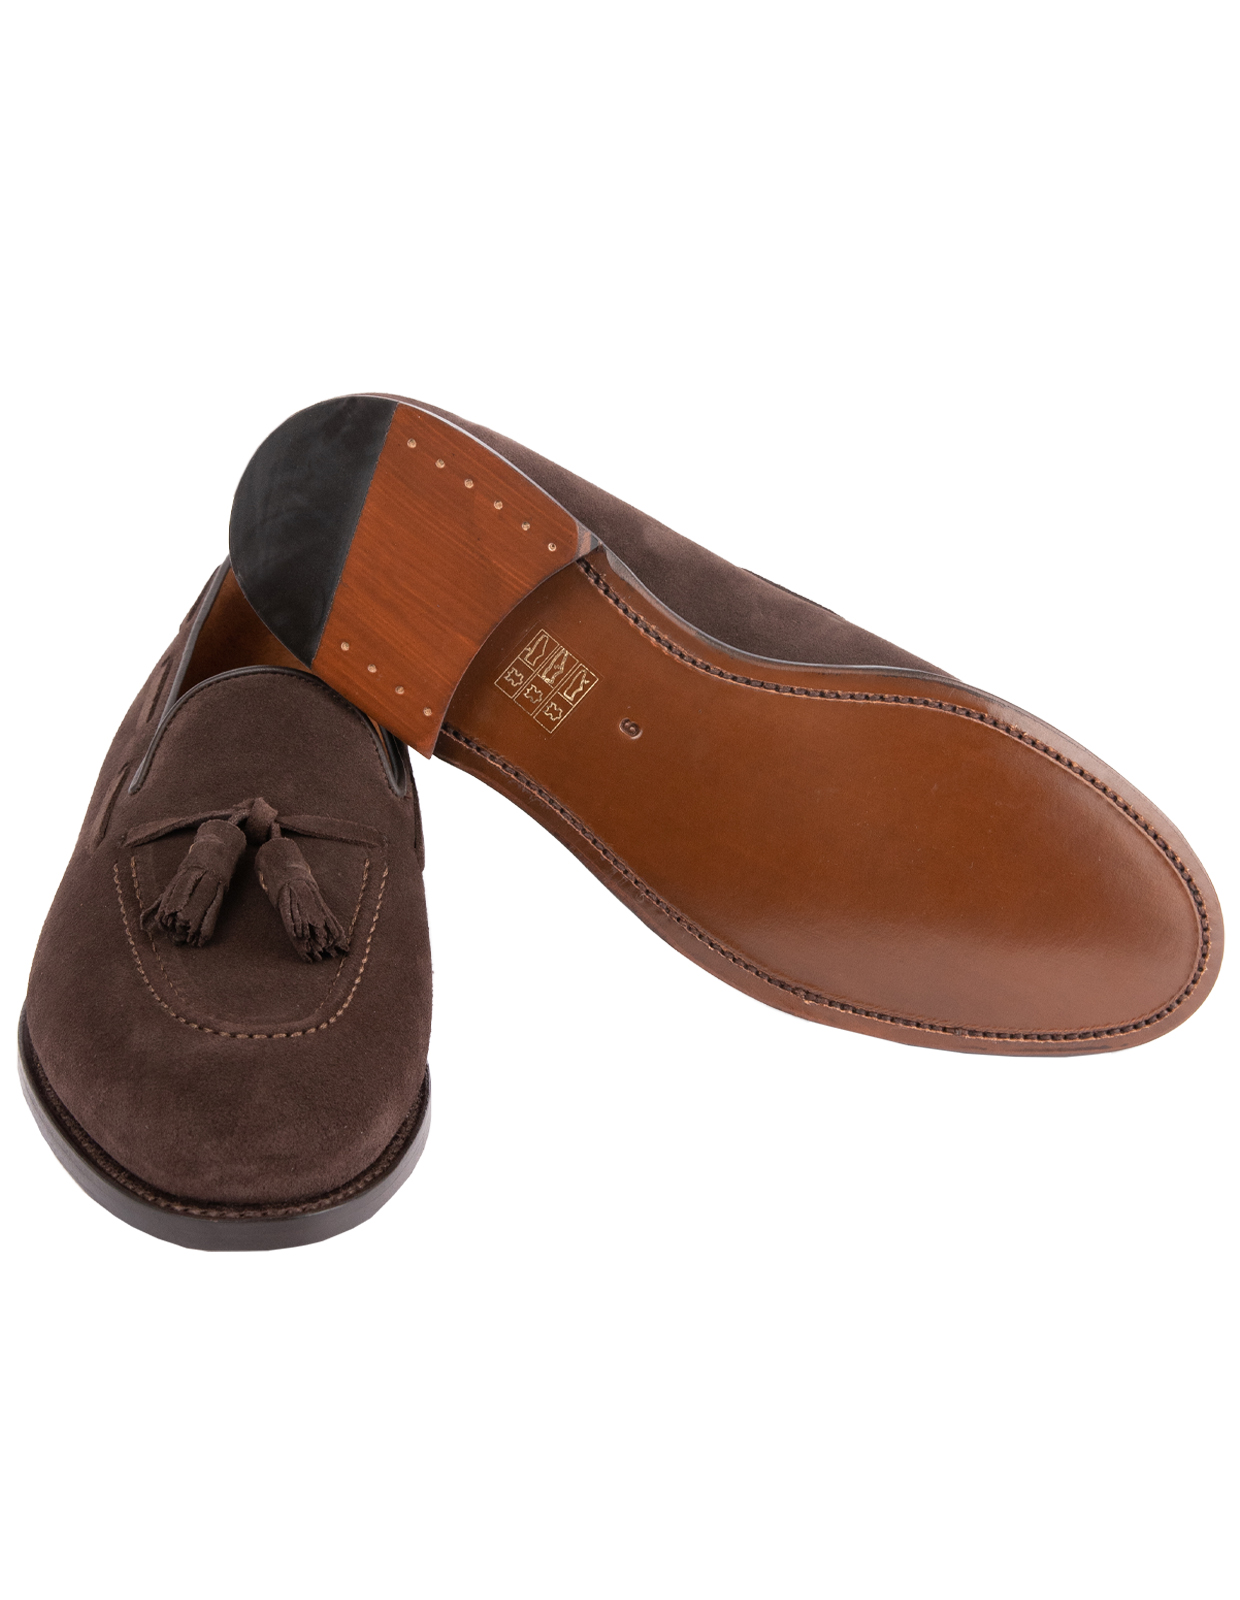 Tassel Loafers Suede Bitter Chocolate Stl 12